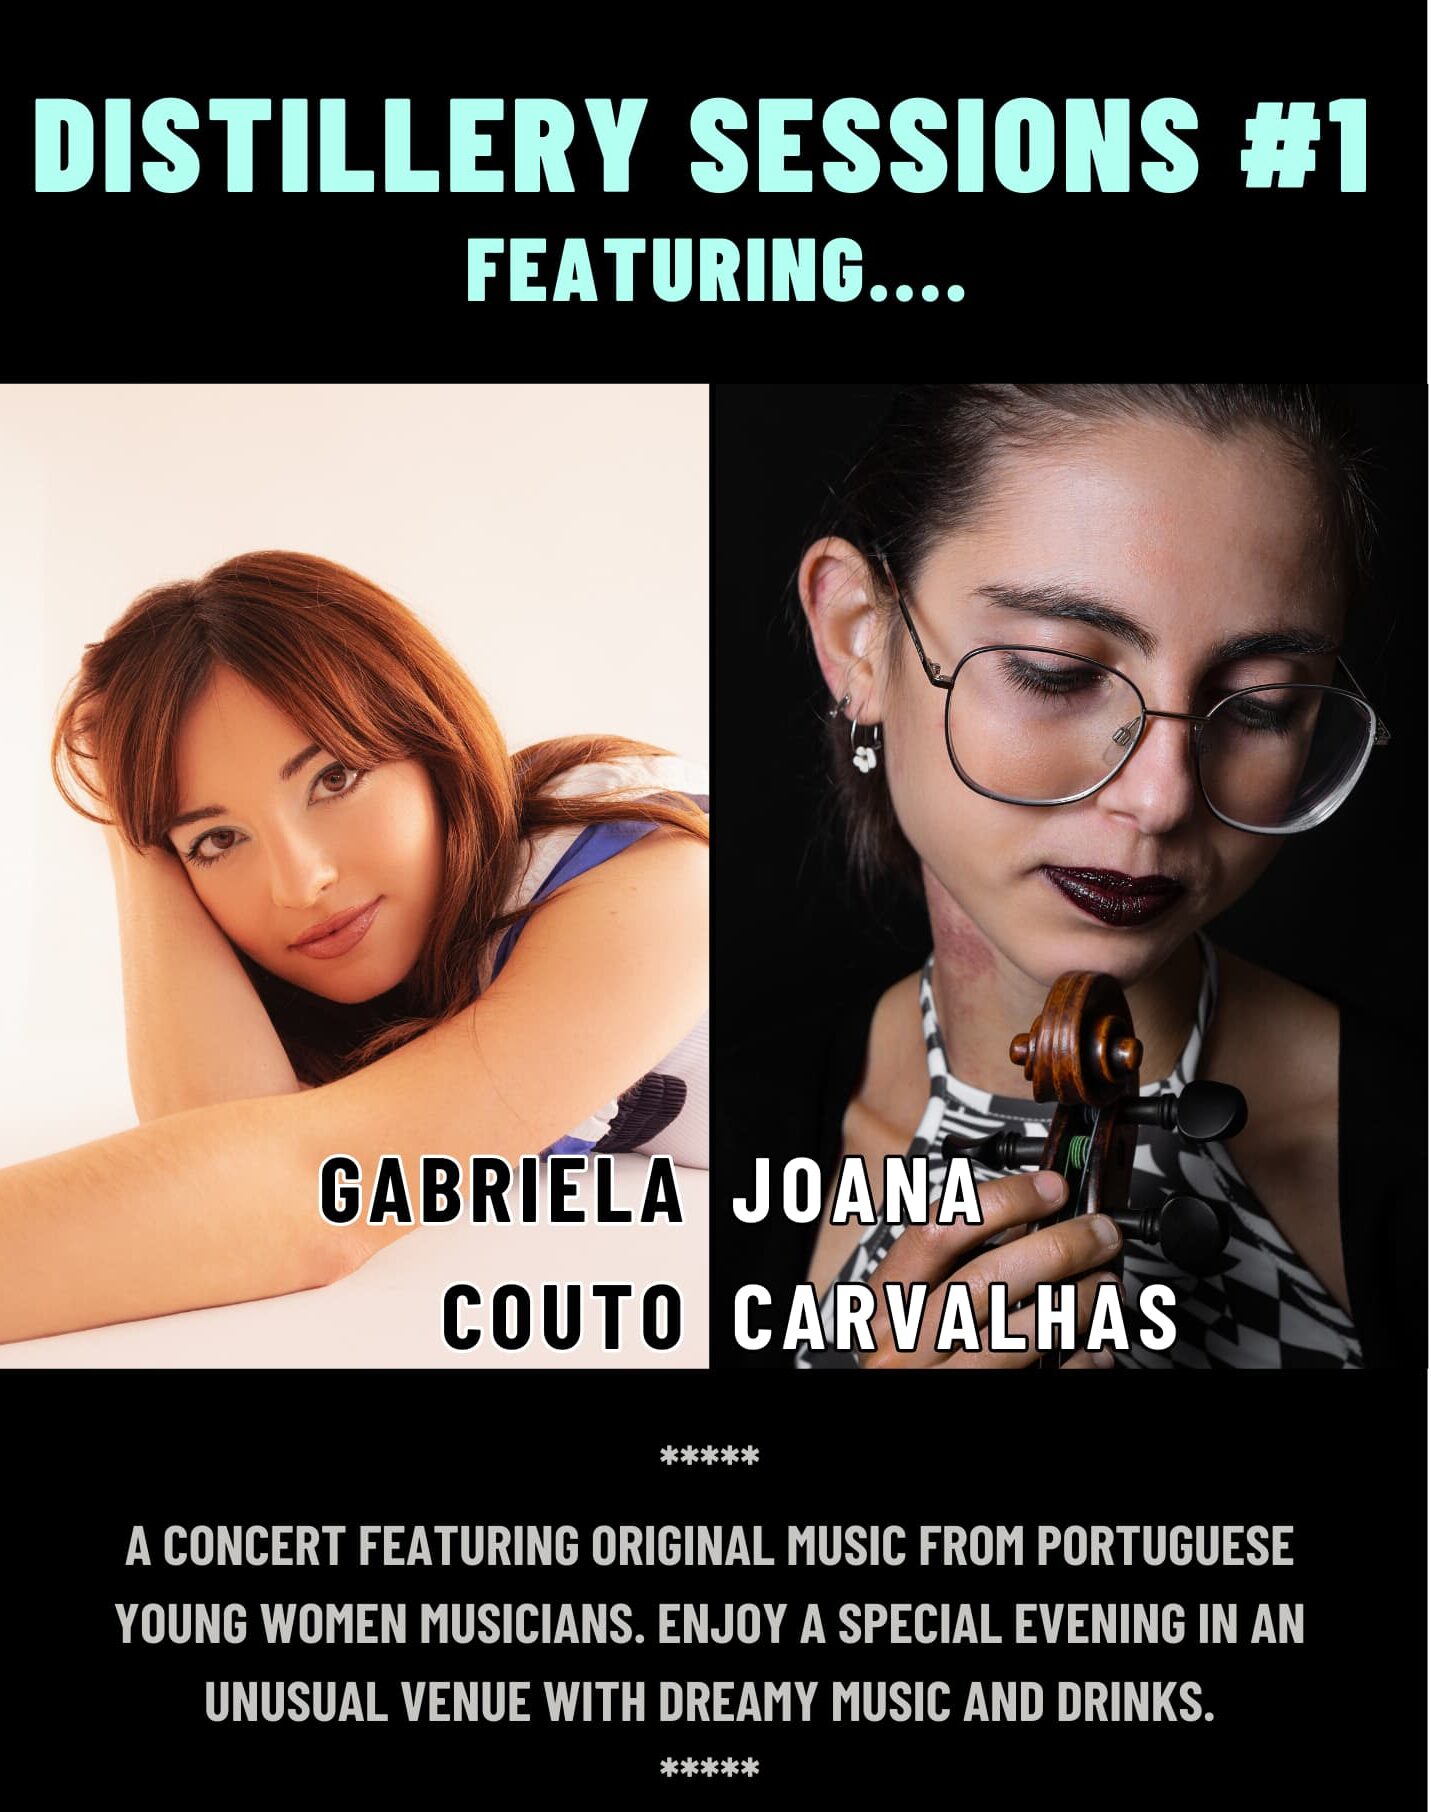 The Distillery Sessions - Joana Carvalhas & Gabriela Couto